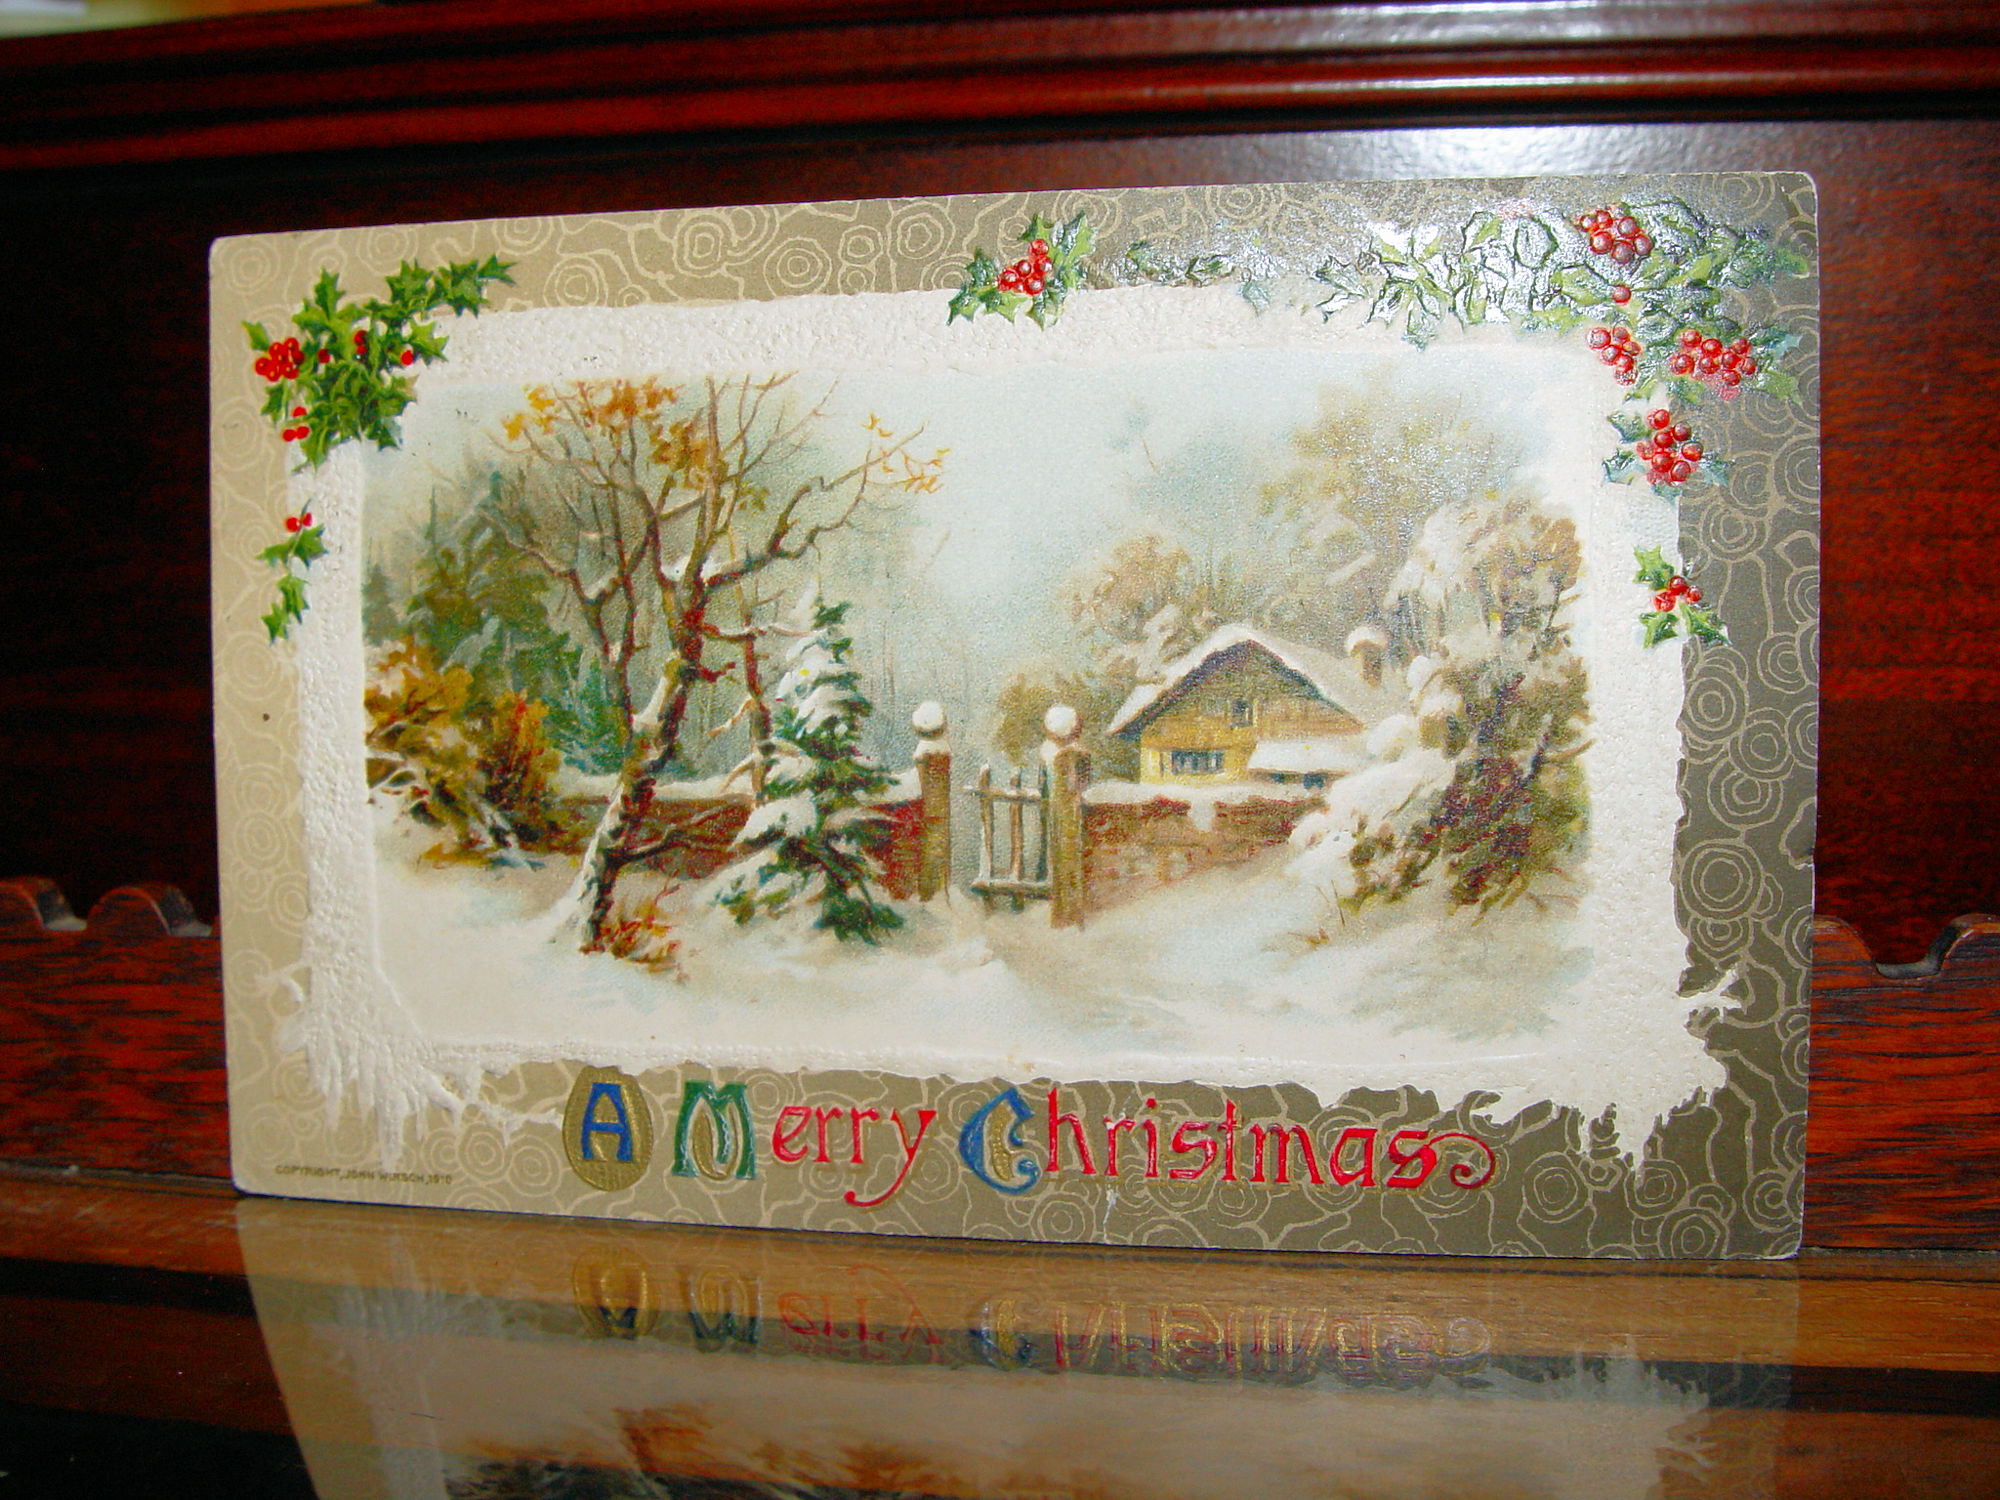 1910 'A Merry
                                                Christmas', Holly
                                                Berries and Cottage,
                                                John Winsch, Antique
                                                Postcard